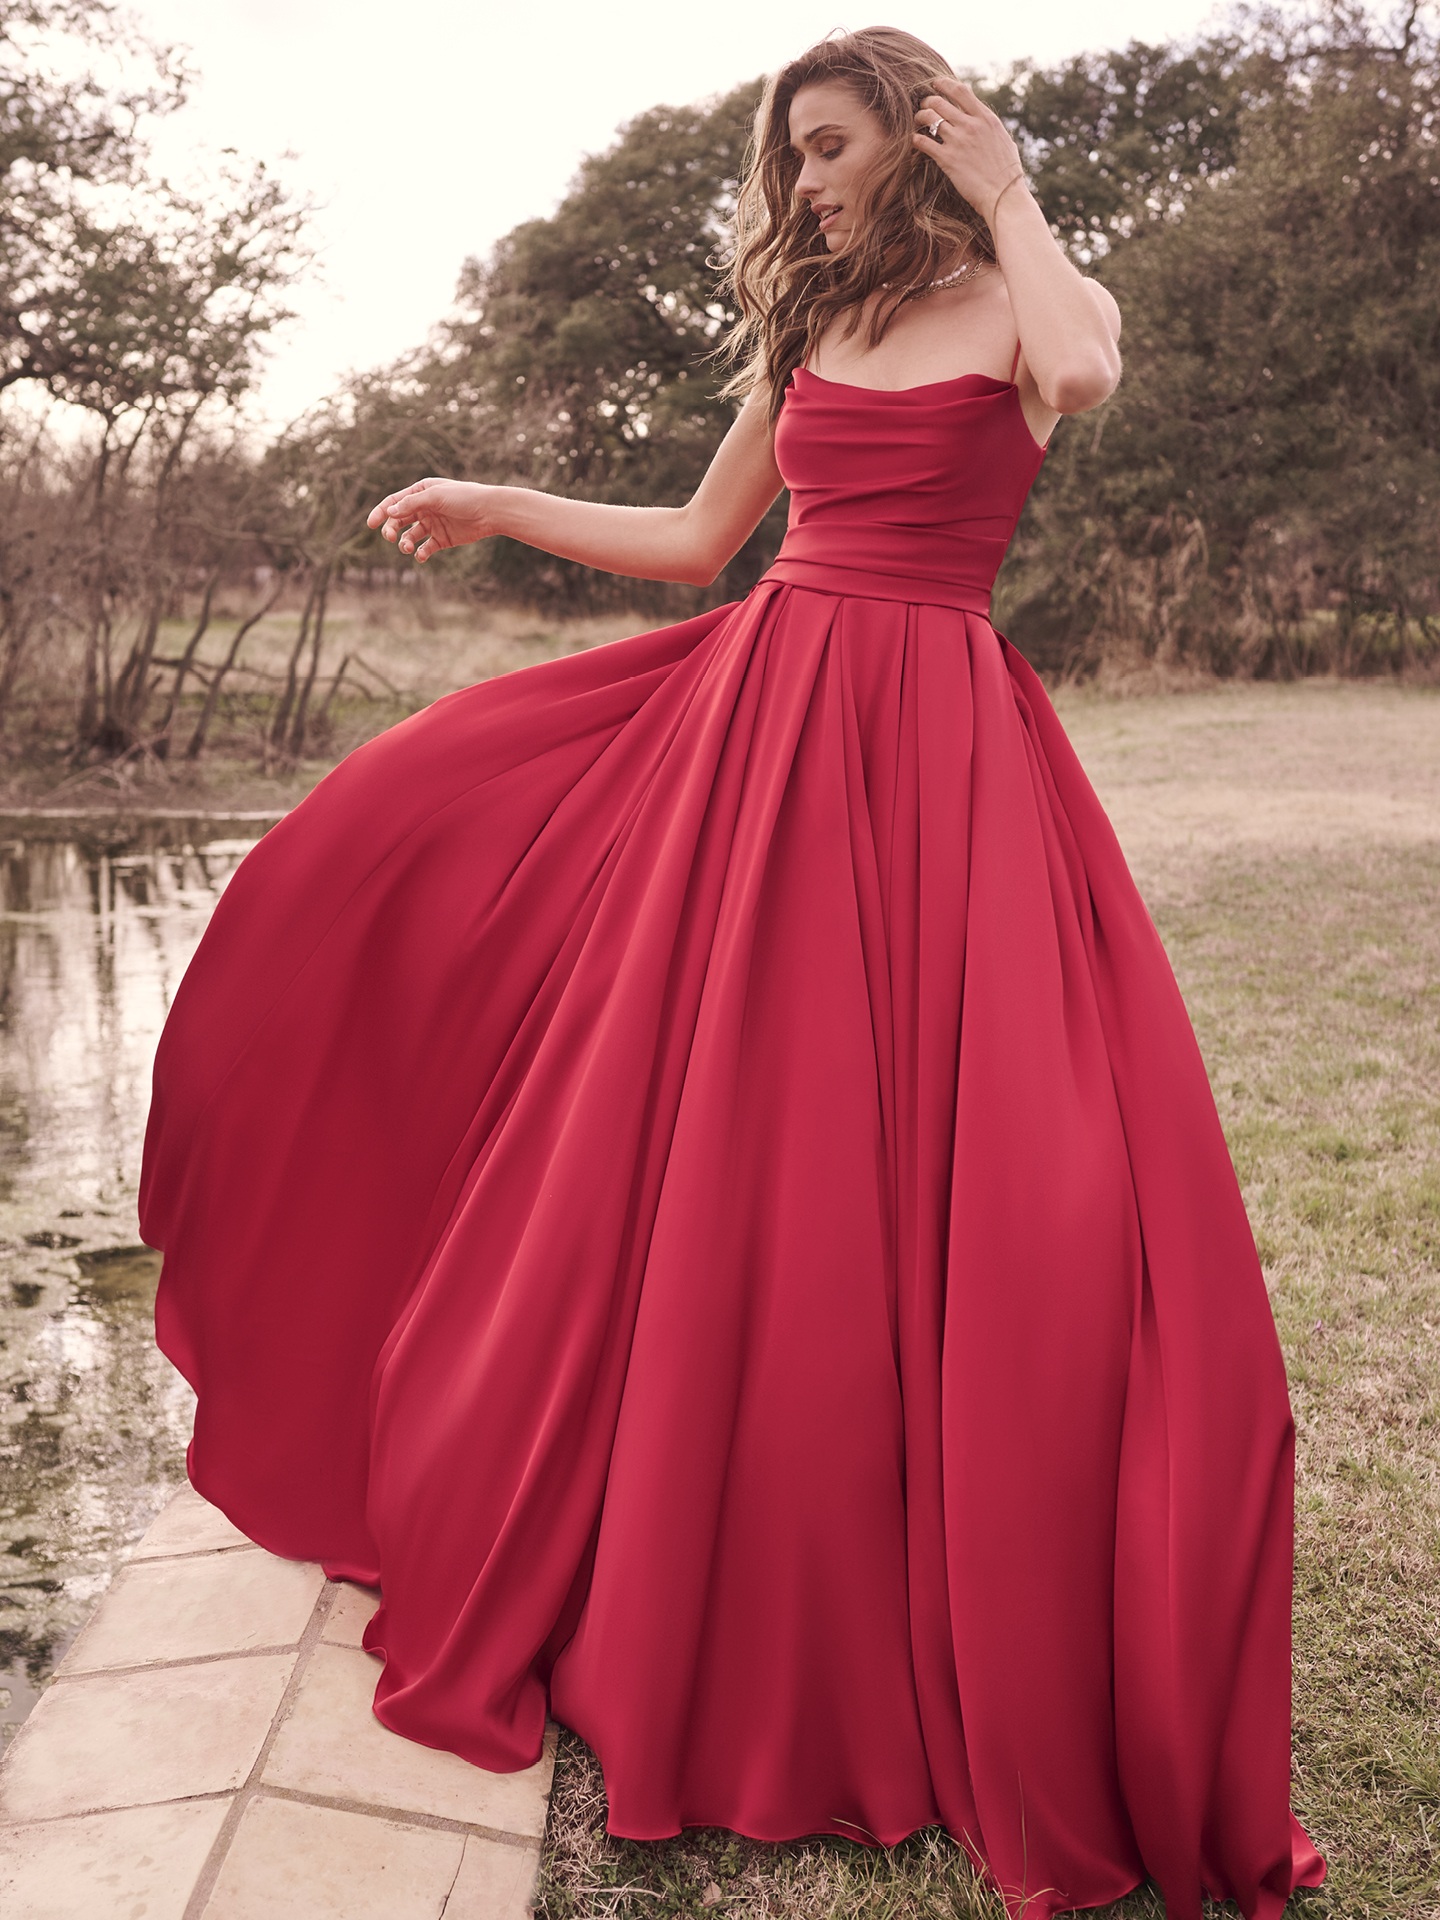 Flounce red princess tulle ball gown wedding/prom dress with tiered skirt -  various styles